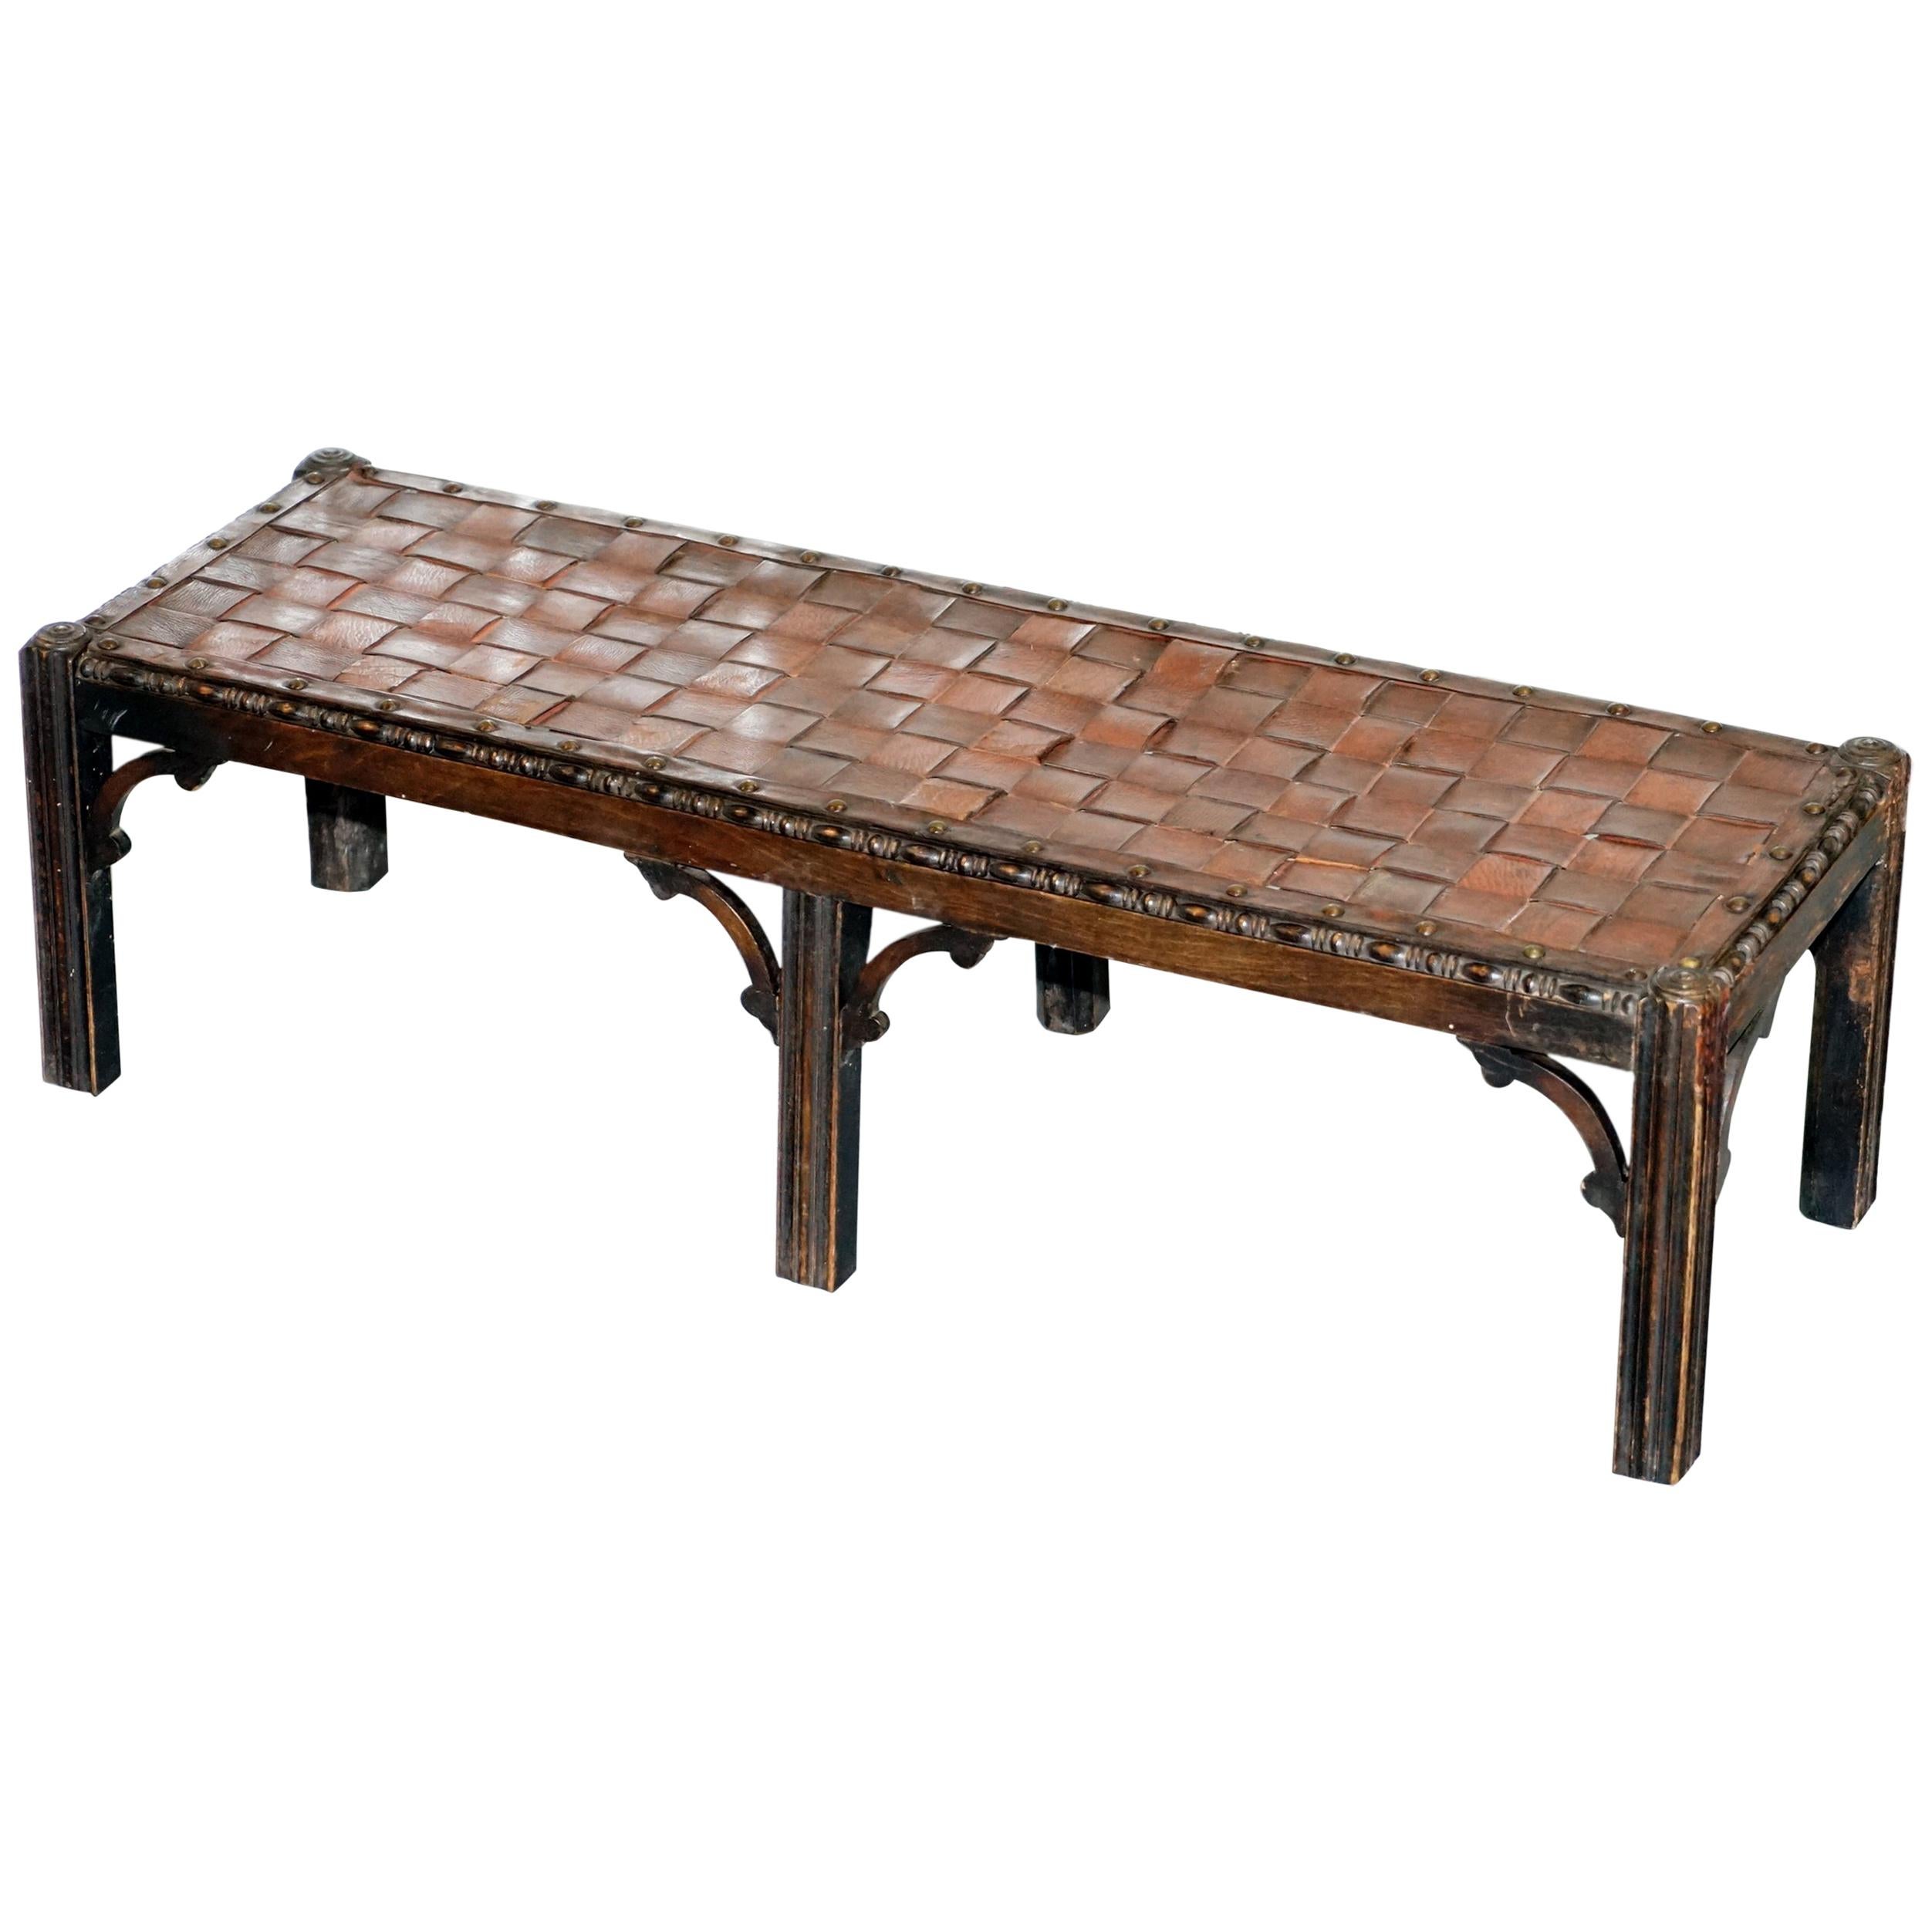 Small Early 19th Century Leather Woven Bench Style Footstool Hand-Carved Wood